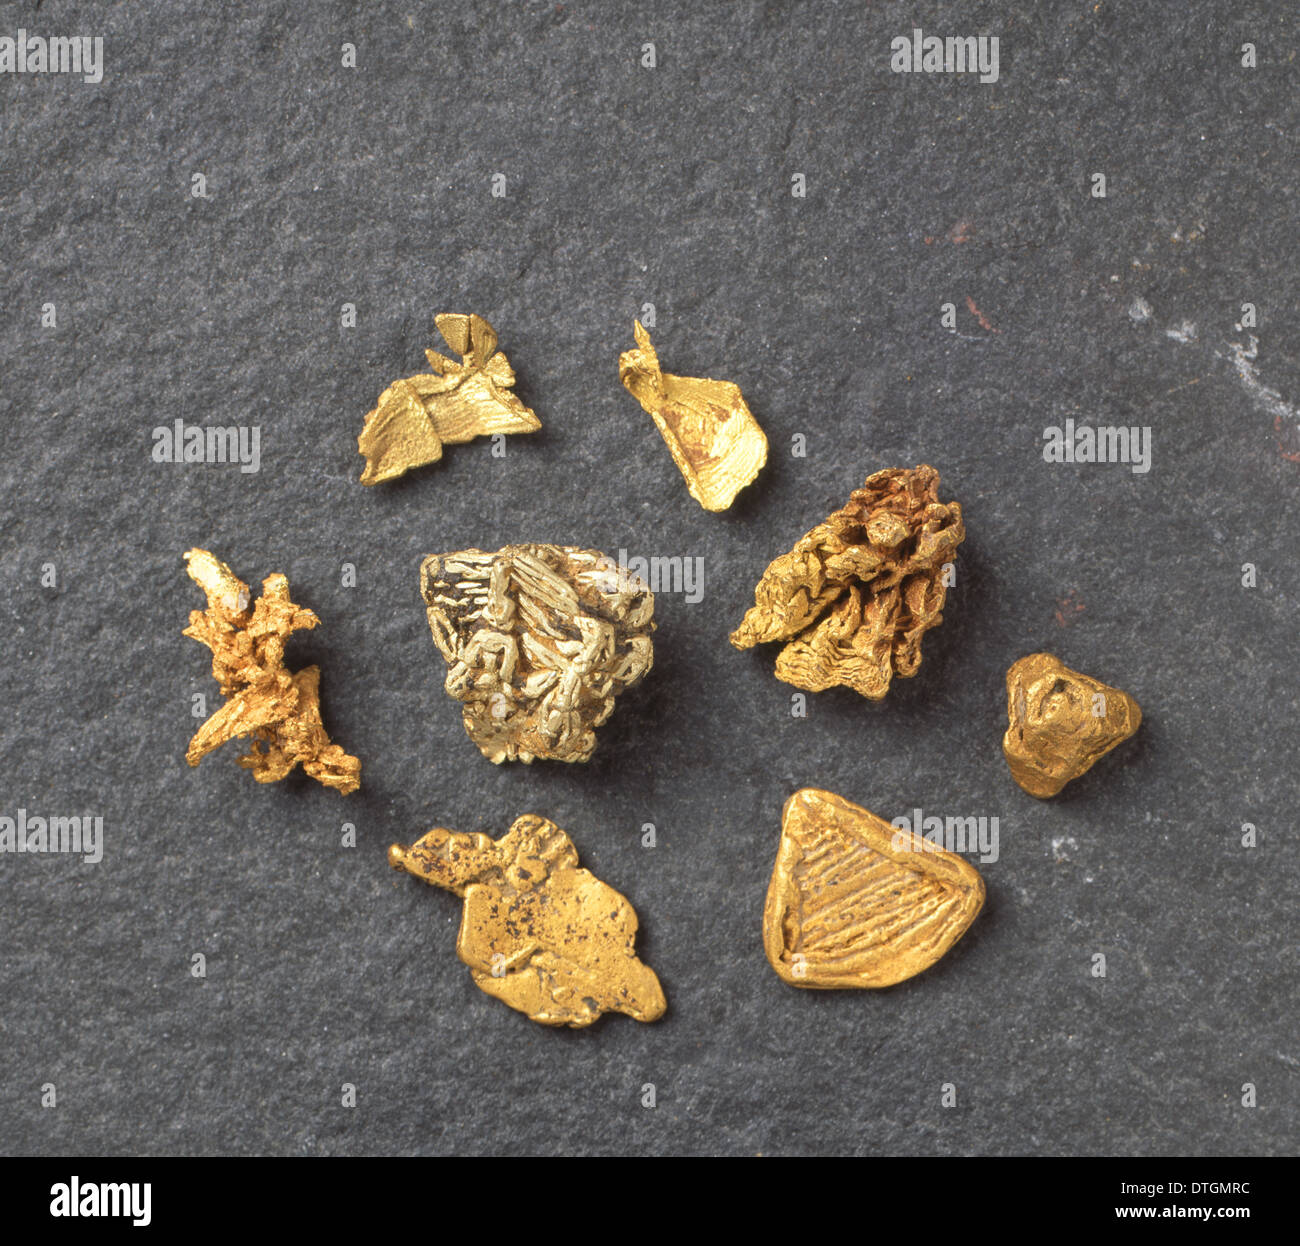 Diverse gold-nuggets Stockfoto